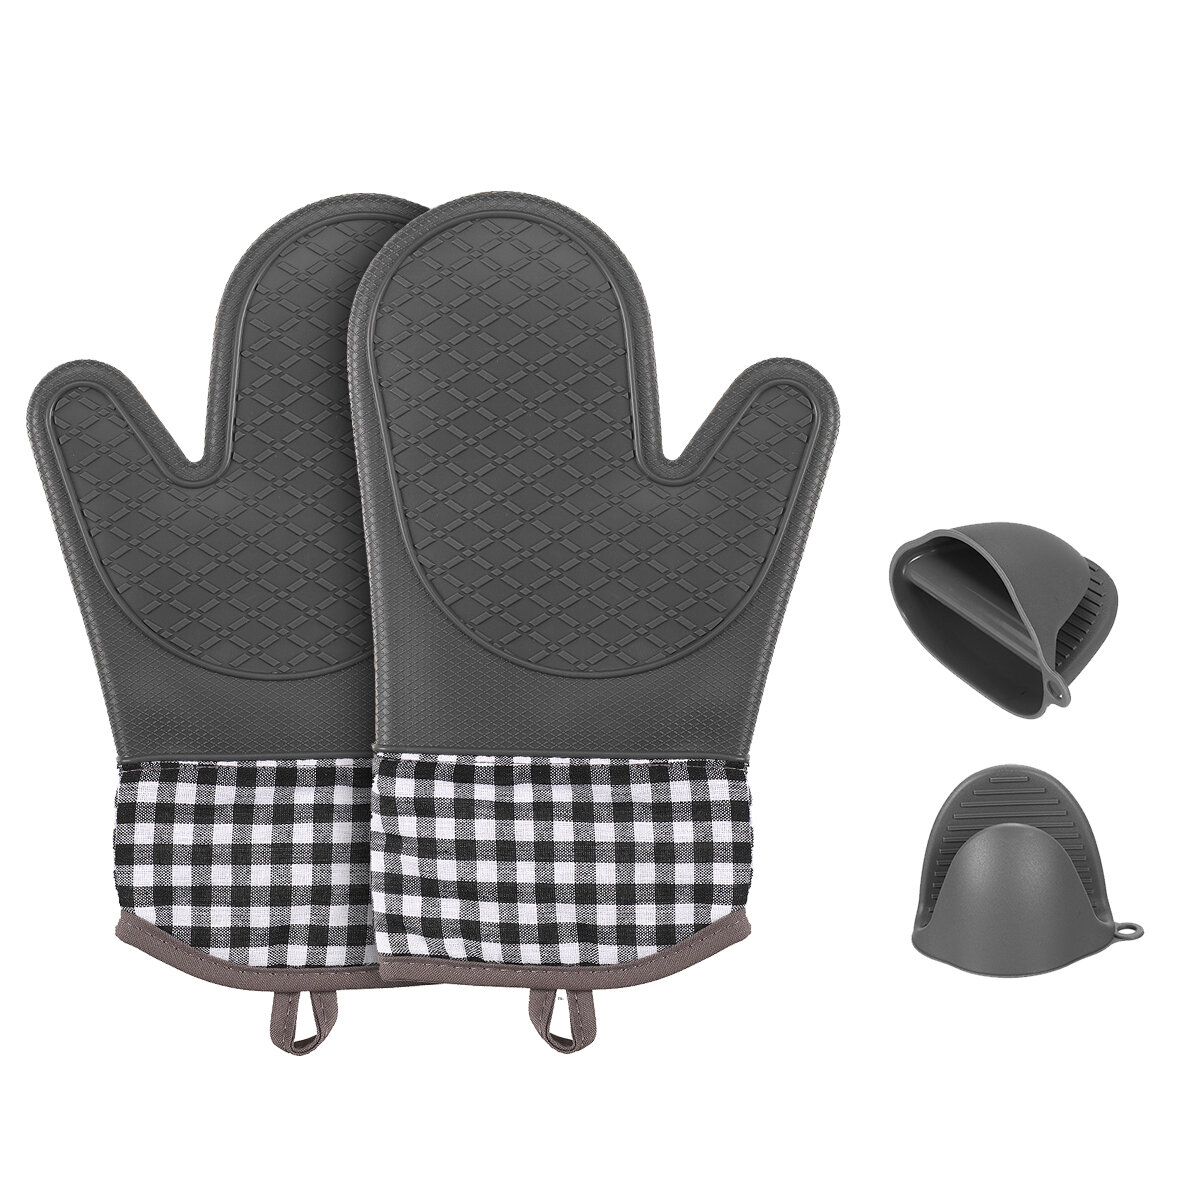 4 Pcs/set Silicone Heat Insulation Grips Oven Mitts Gloves Cooking Mitts for Kitchen Camping Picnic BBQ